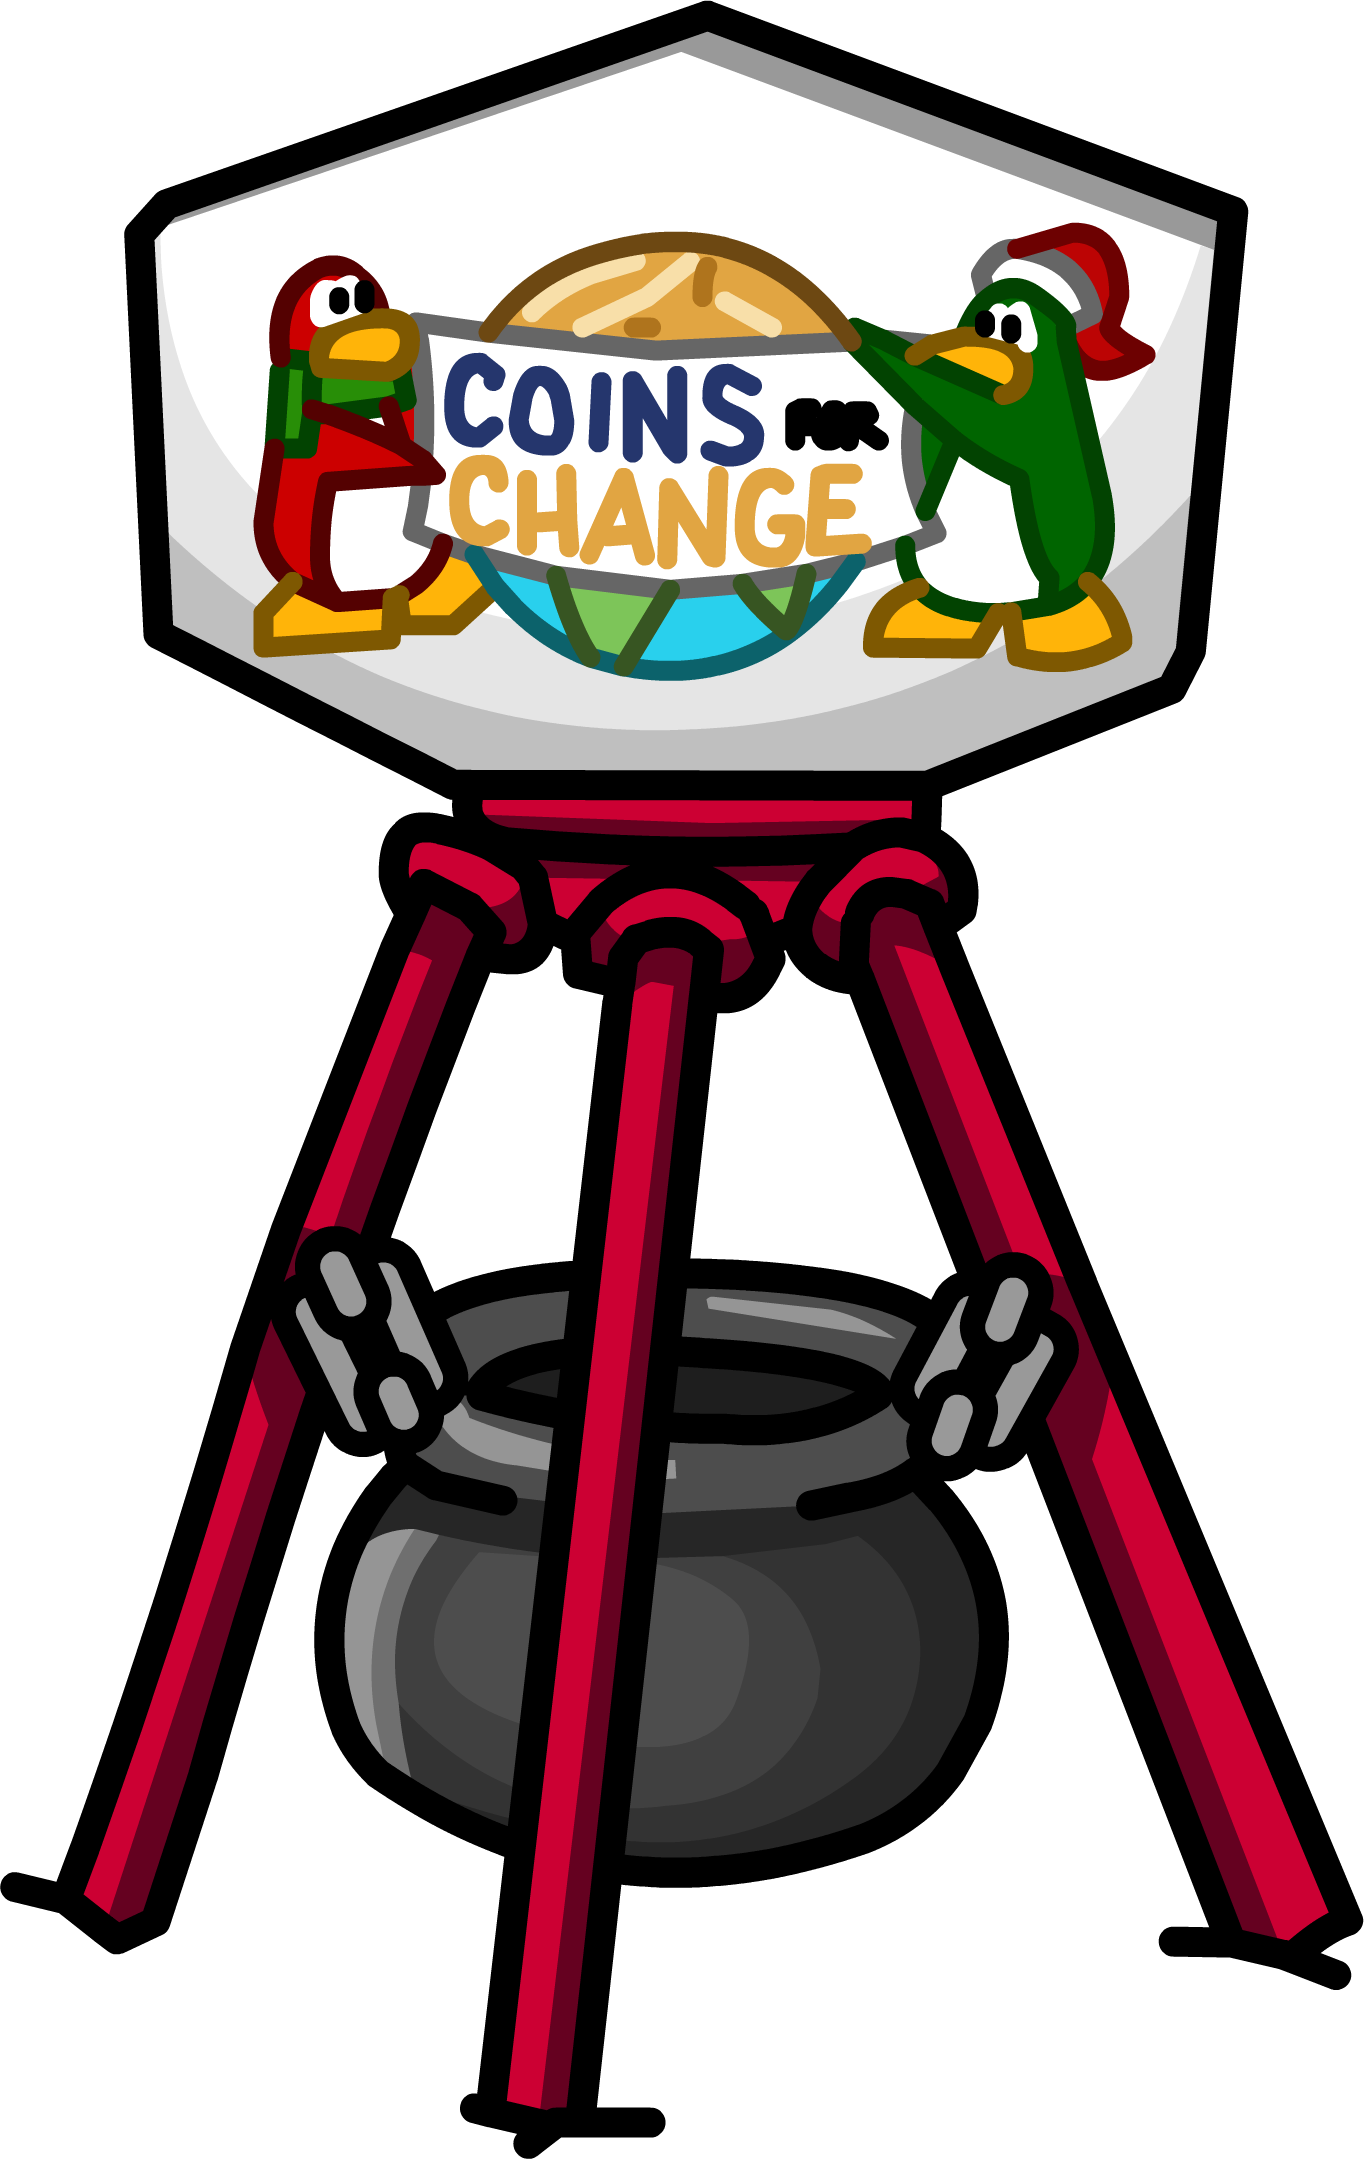 This Party Is Host To A Real World Event At Club Penguin - Club Penguin Coins For Change (1364x2159)